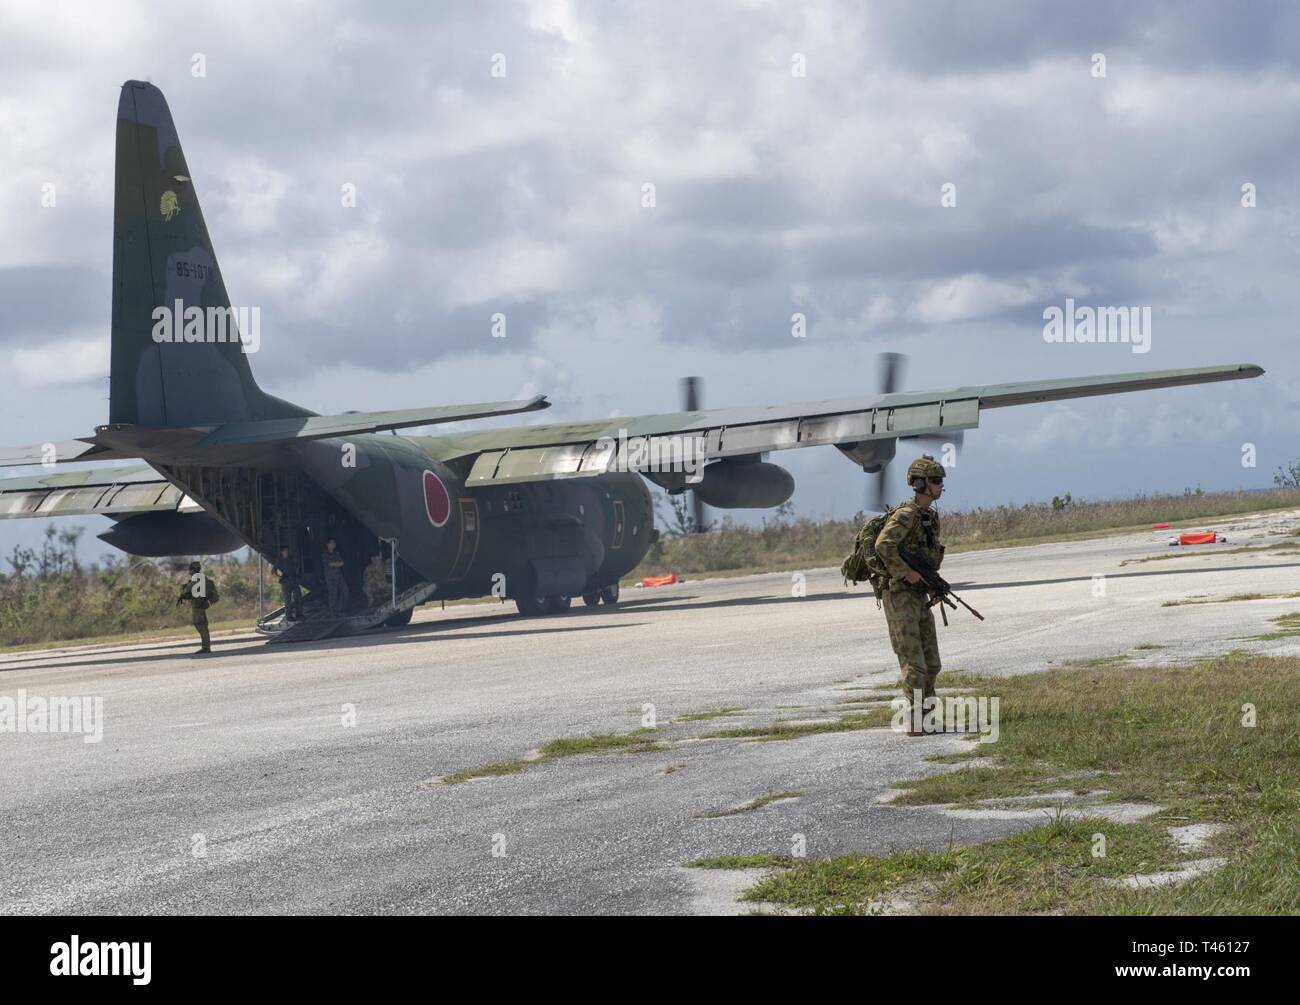 Royal Australian Air Force security force members provide security on the flight line at Tinian, U.S. Commonwealth of the Northern Marianas Islands during Cope North Feb. 19, 2019. Cope North is an annual multilateral U.S. Pacific Air Forces-sponsored field training exercise focused on combat air forces large-force employment and mobility air forces humanitarian assistance and disaster relief training to enhance interoperability among U.S., Australian and Japanese forces. Stock Photo